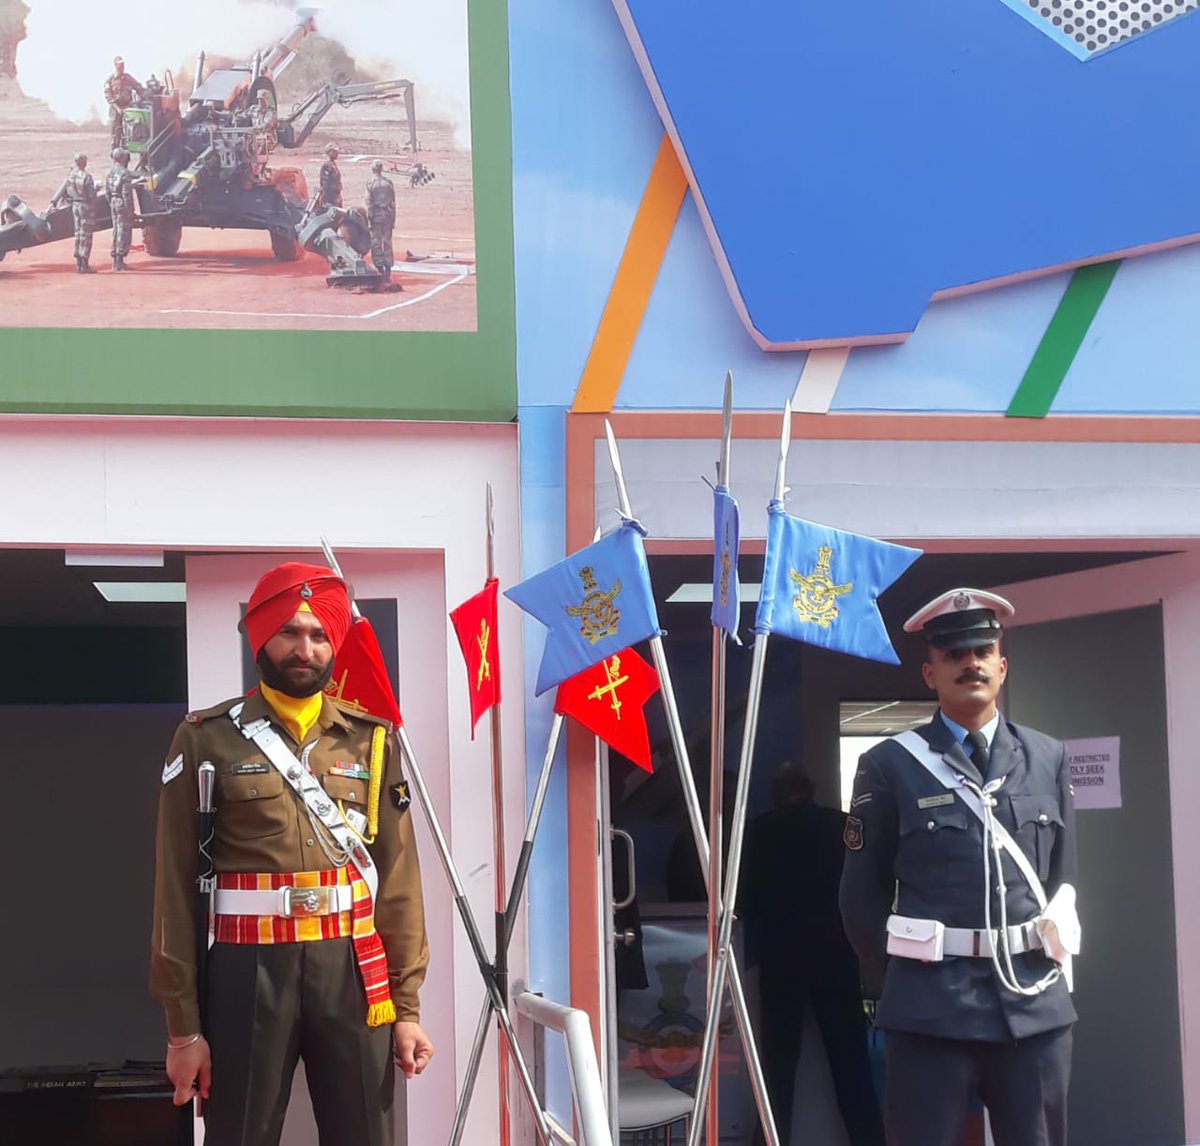 #DefExpo2020 -
Spirit of Jointmanship!
Indian Army & Indian Air Force guards on duty at @DefExpoIndia.